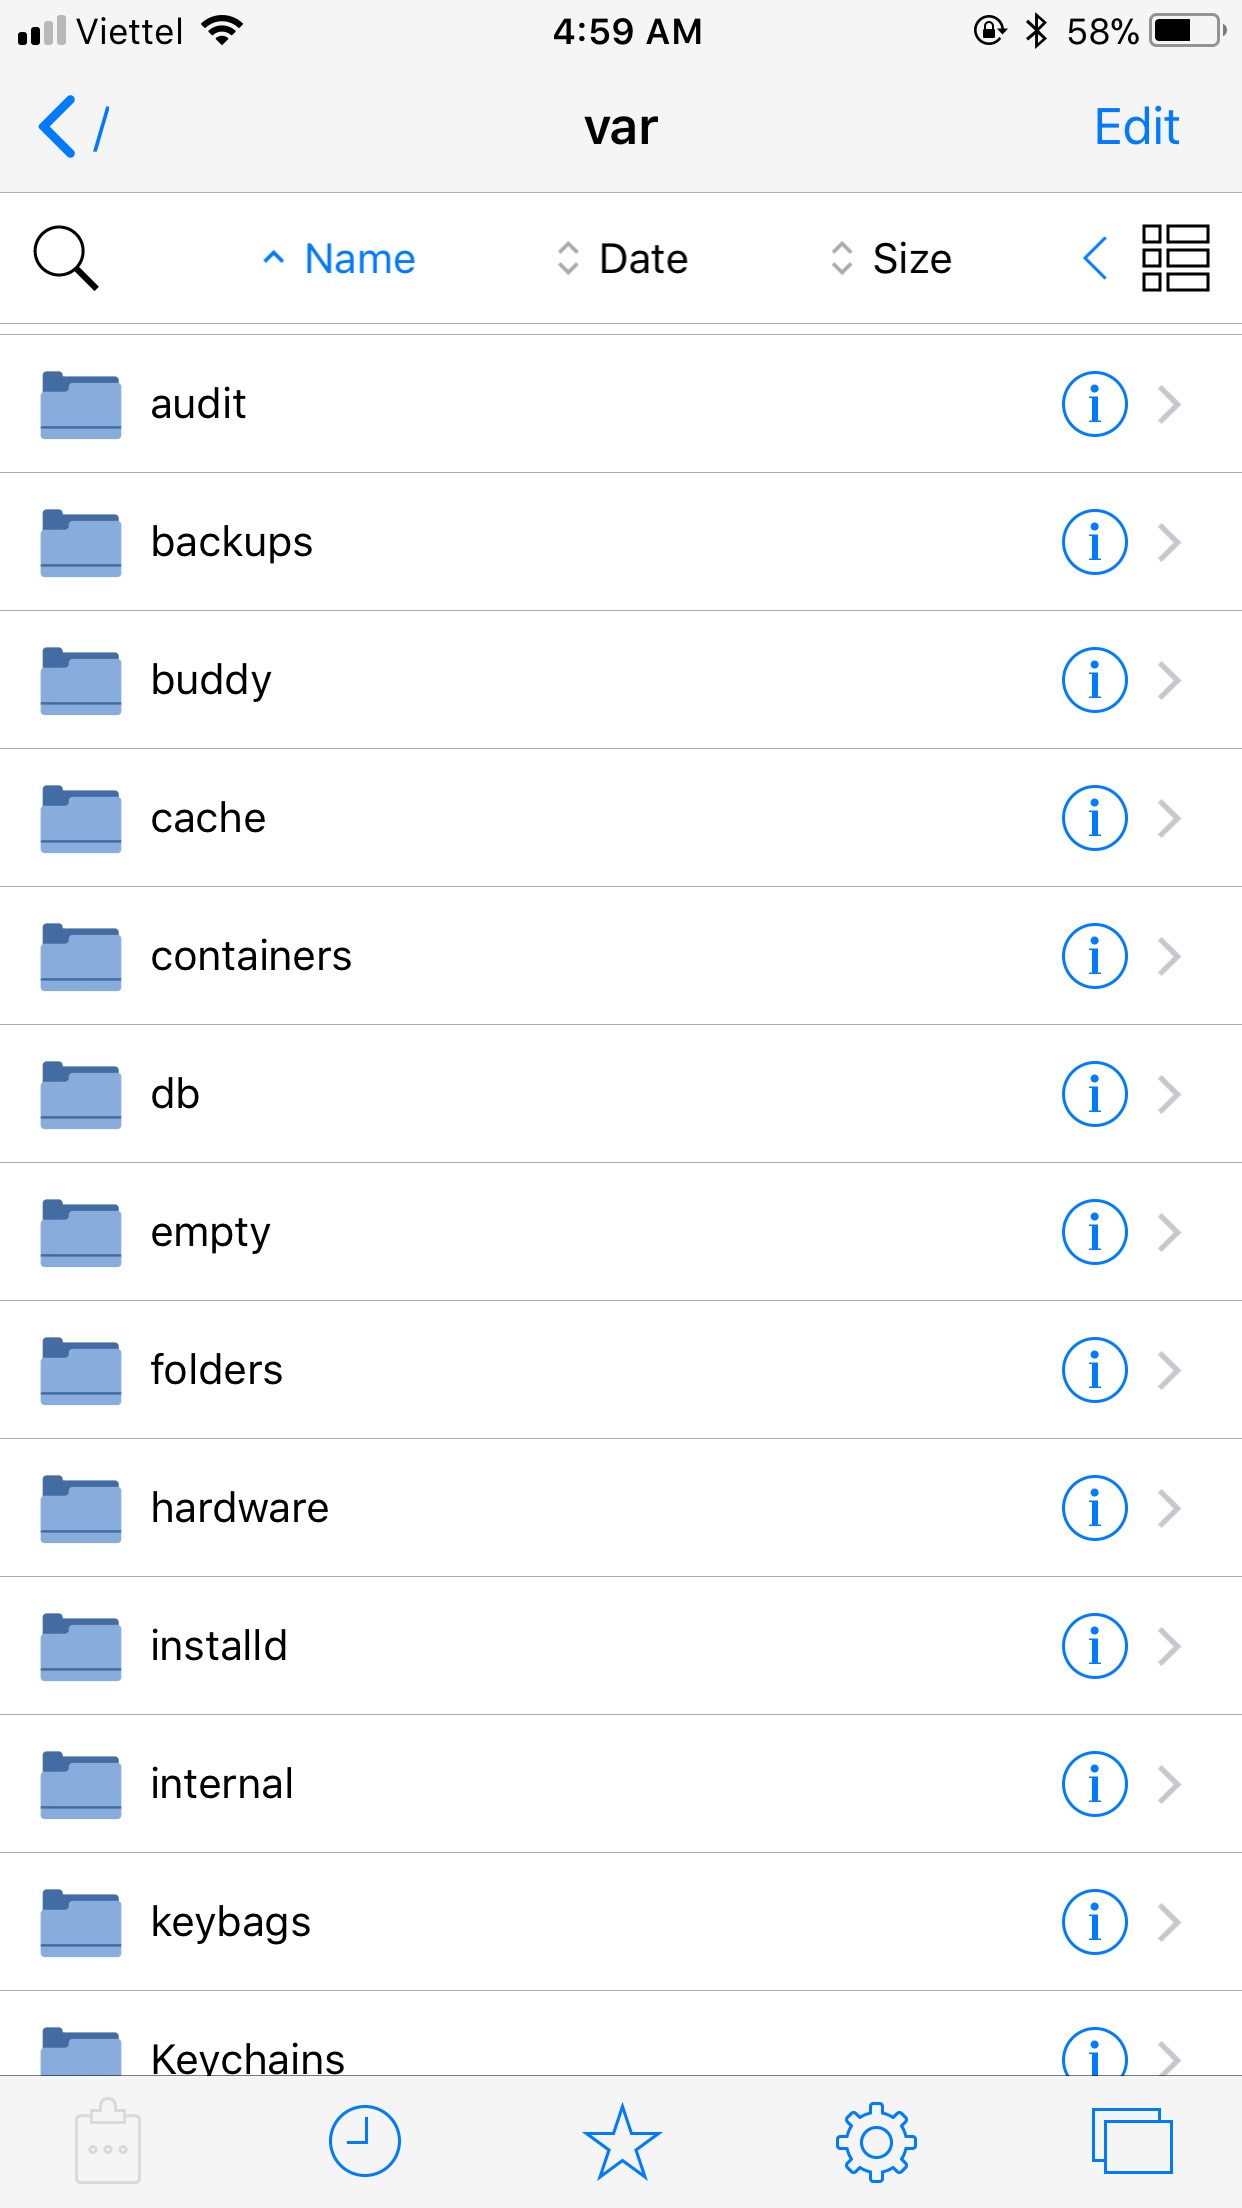 ipa library ios download file manager